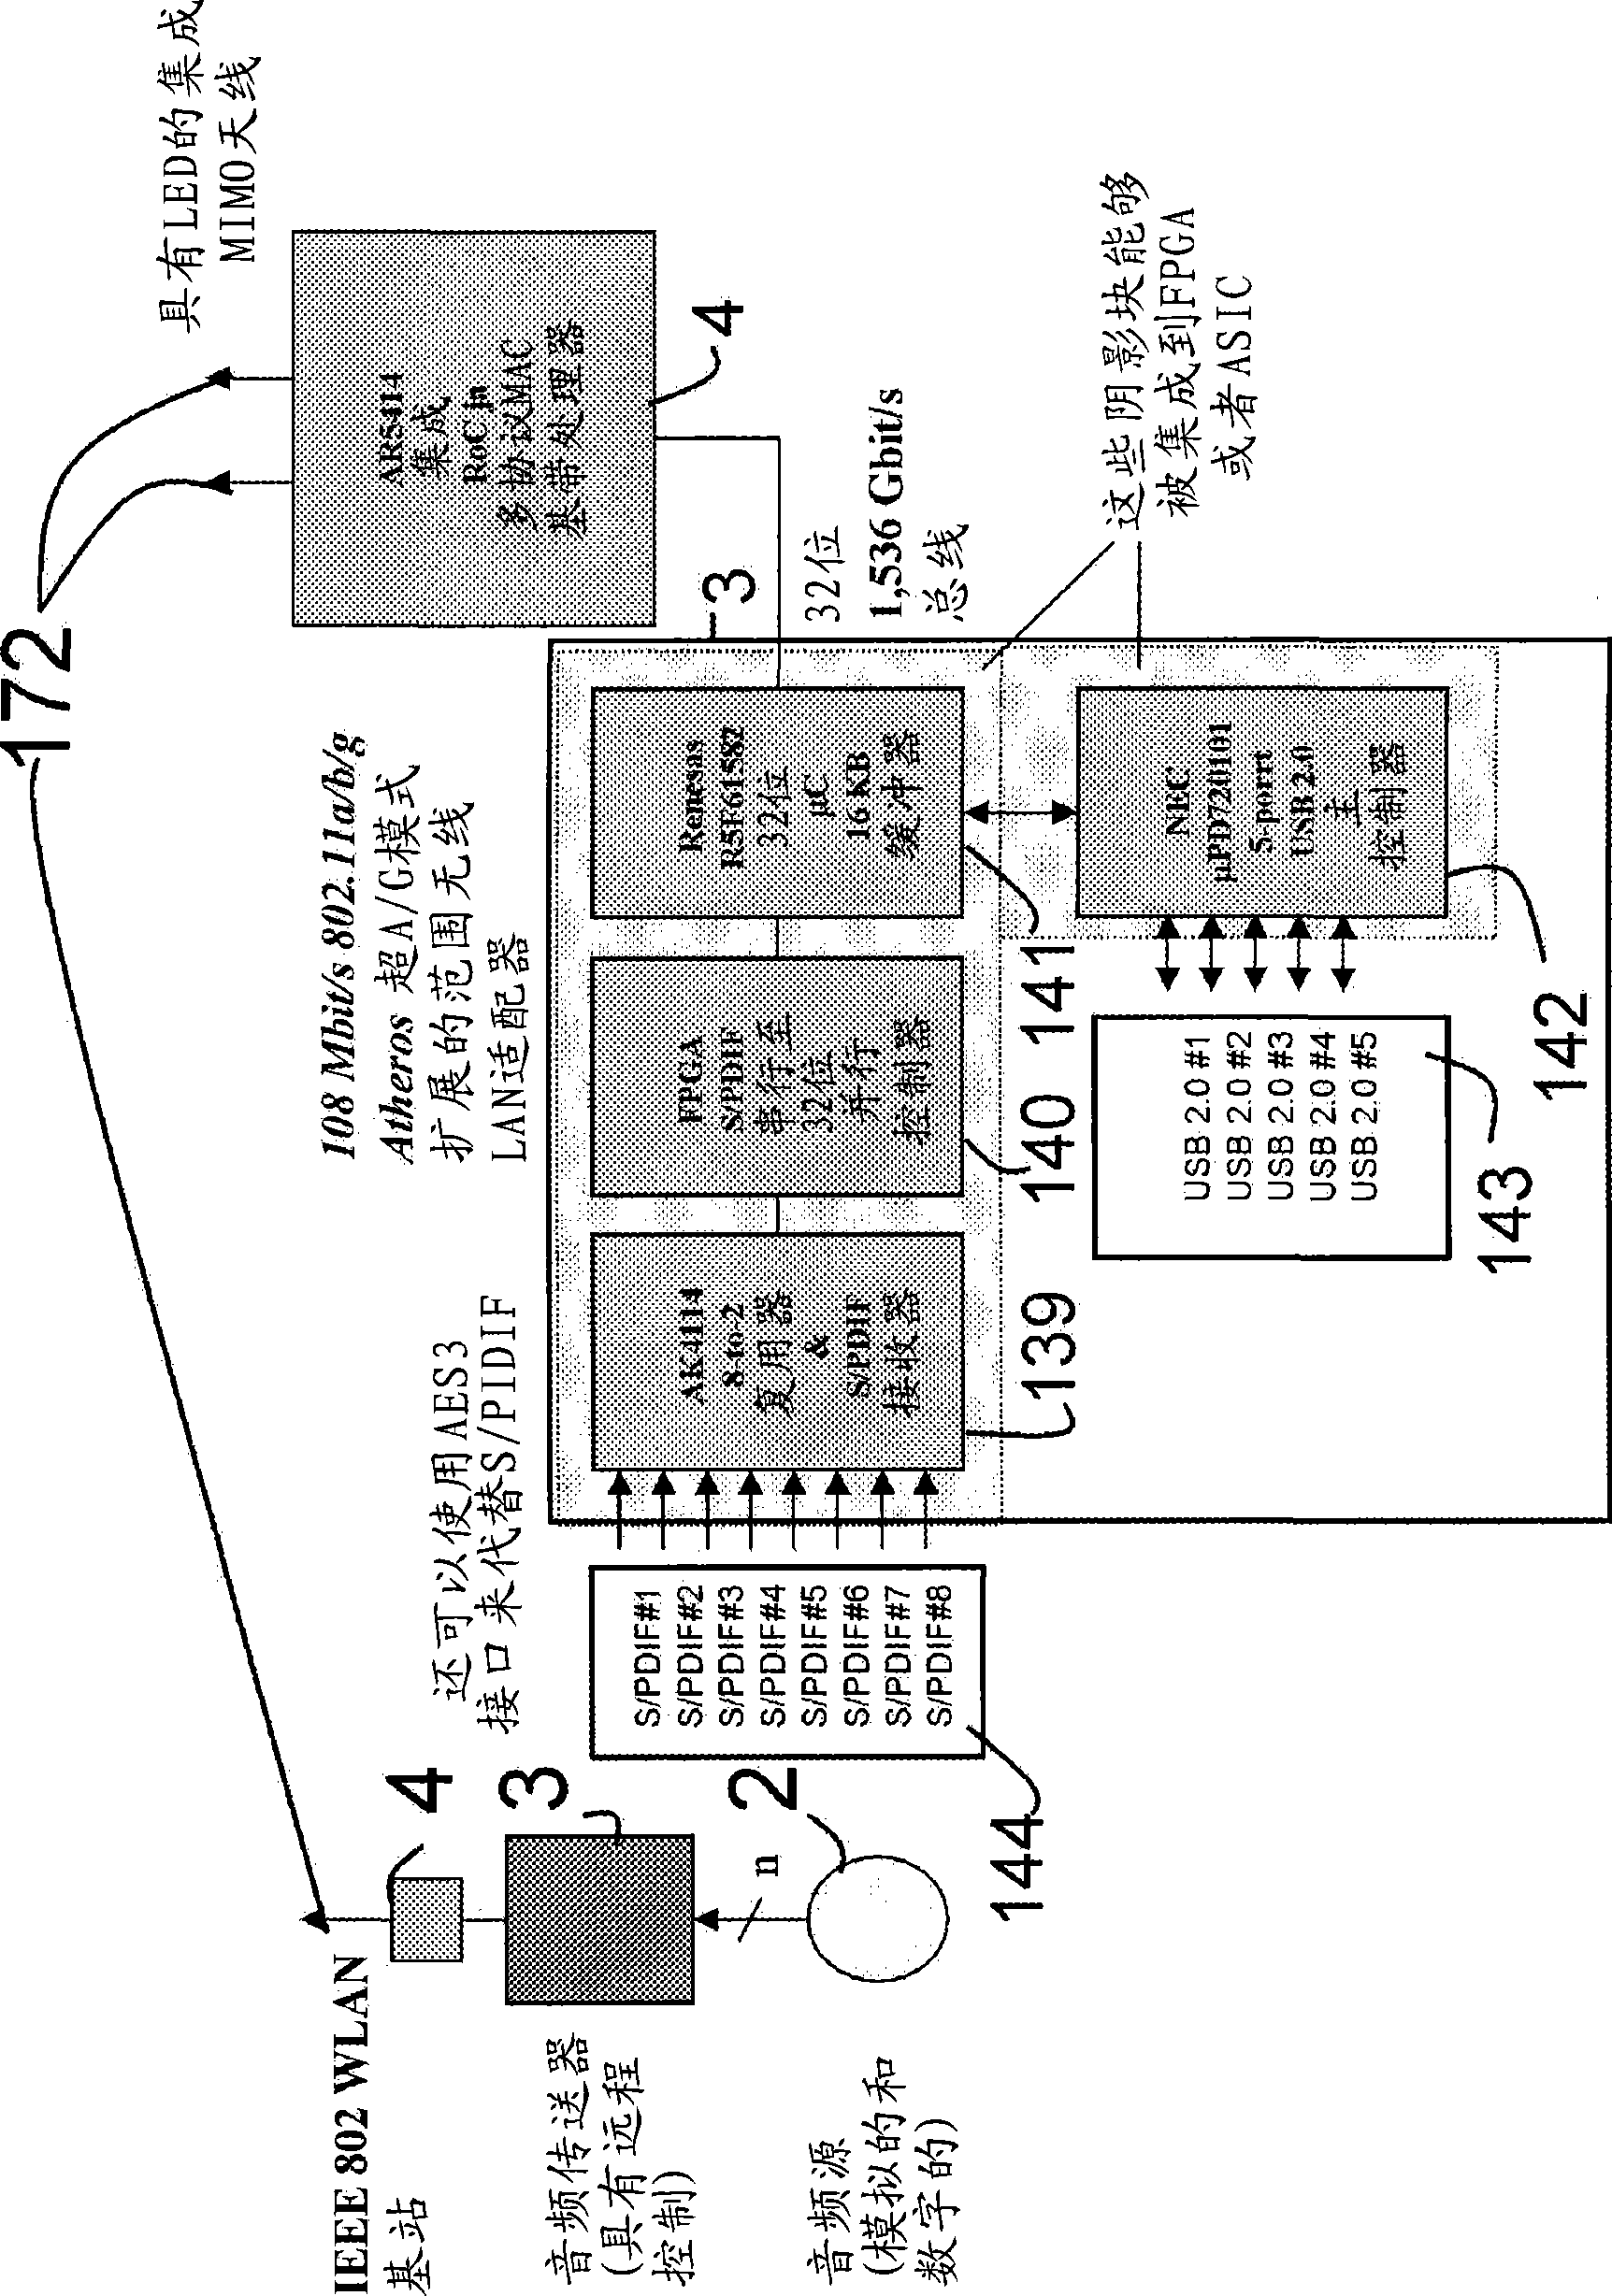 Method and system for wireless real-time transmission of multichannel audio or video data